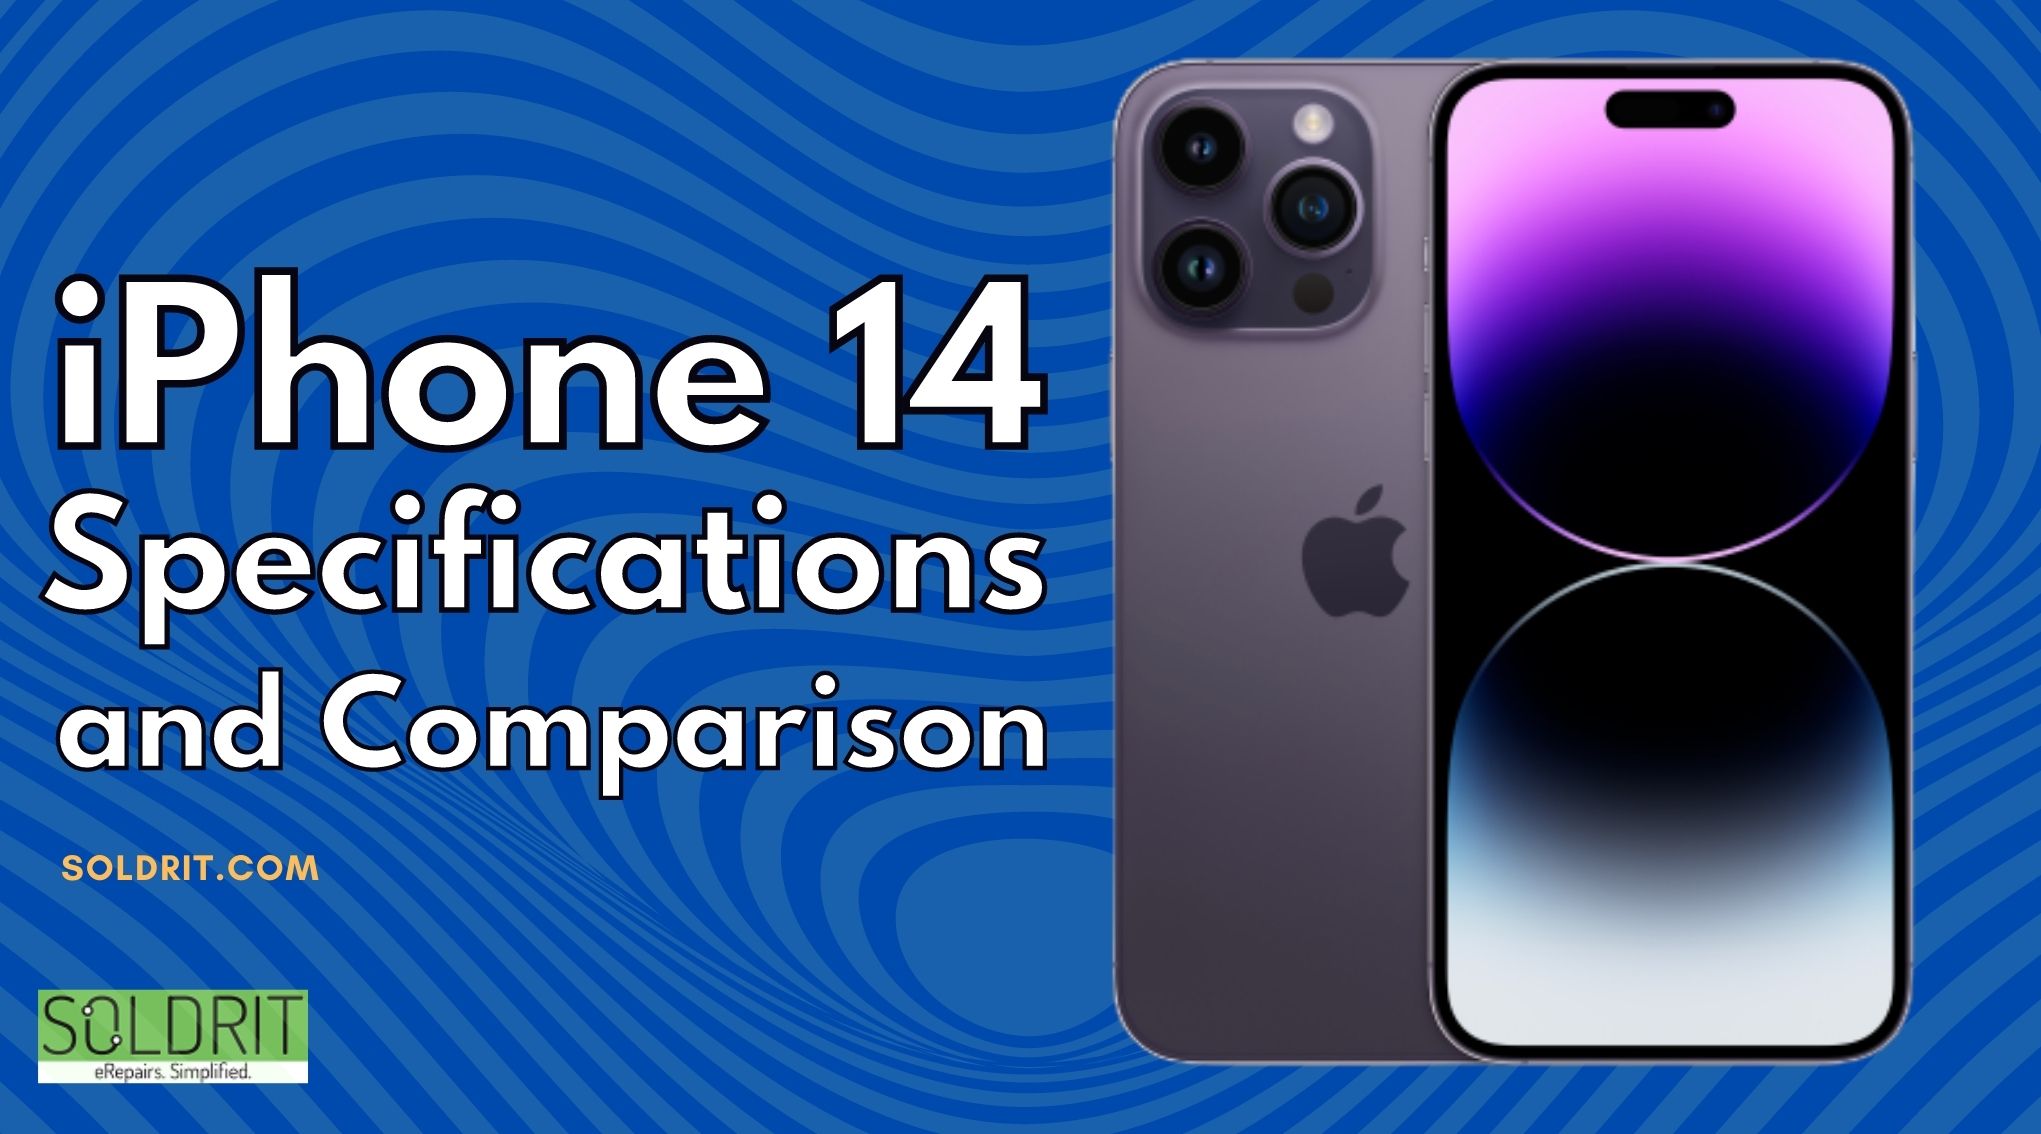 iPhone 14 Specifications and Comparison 2022